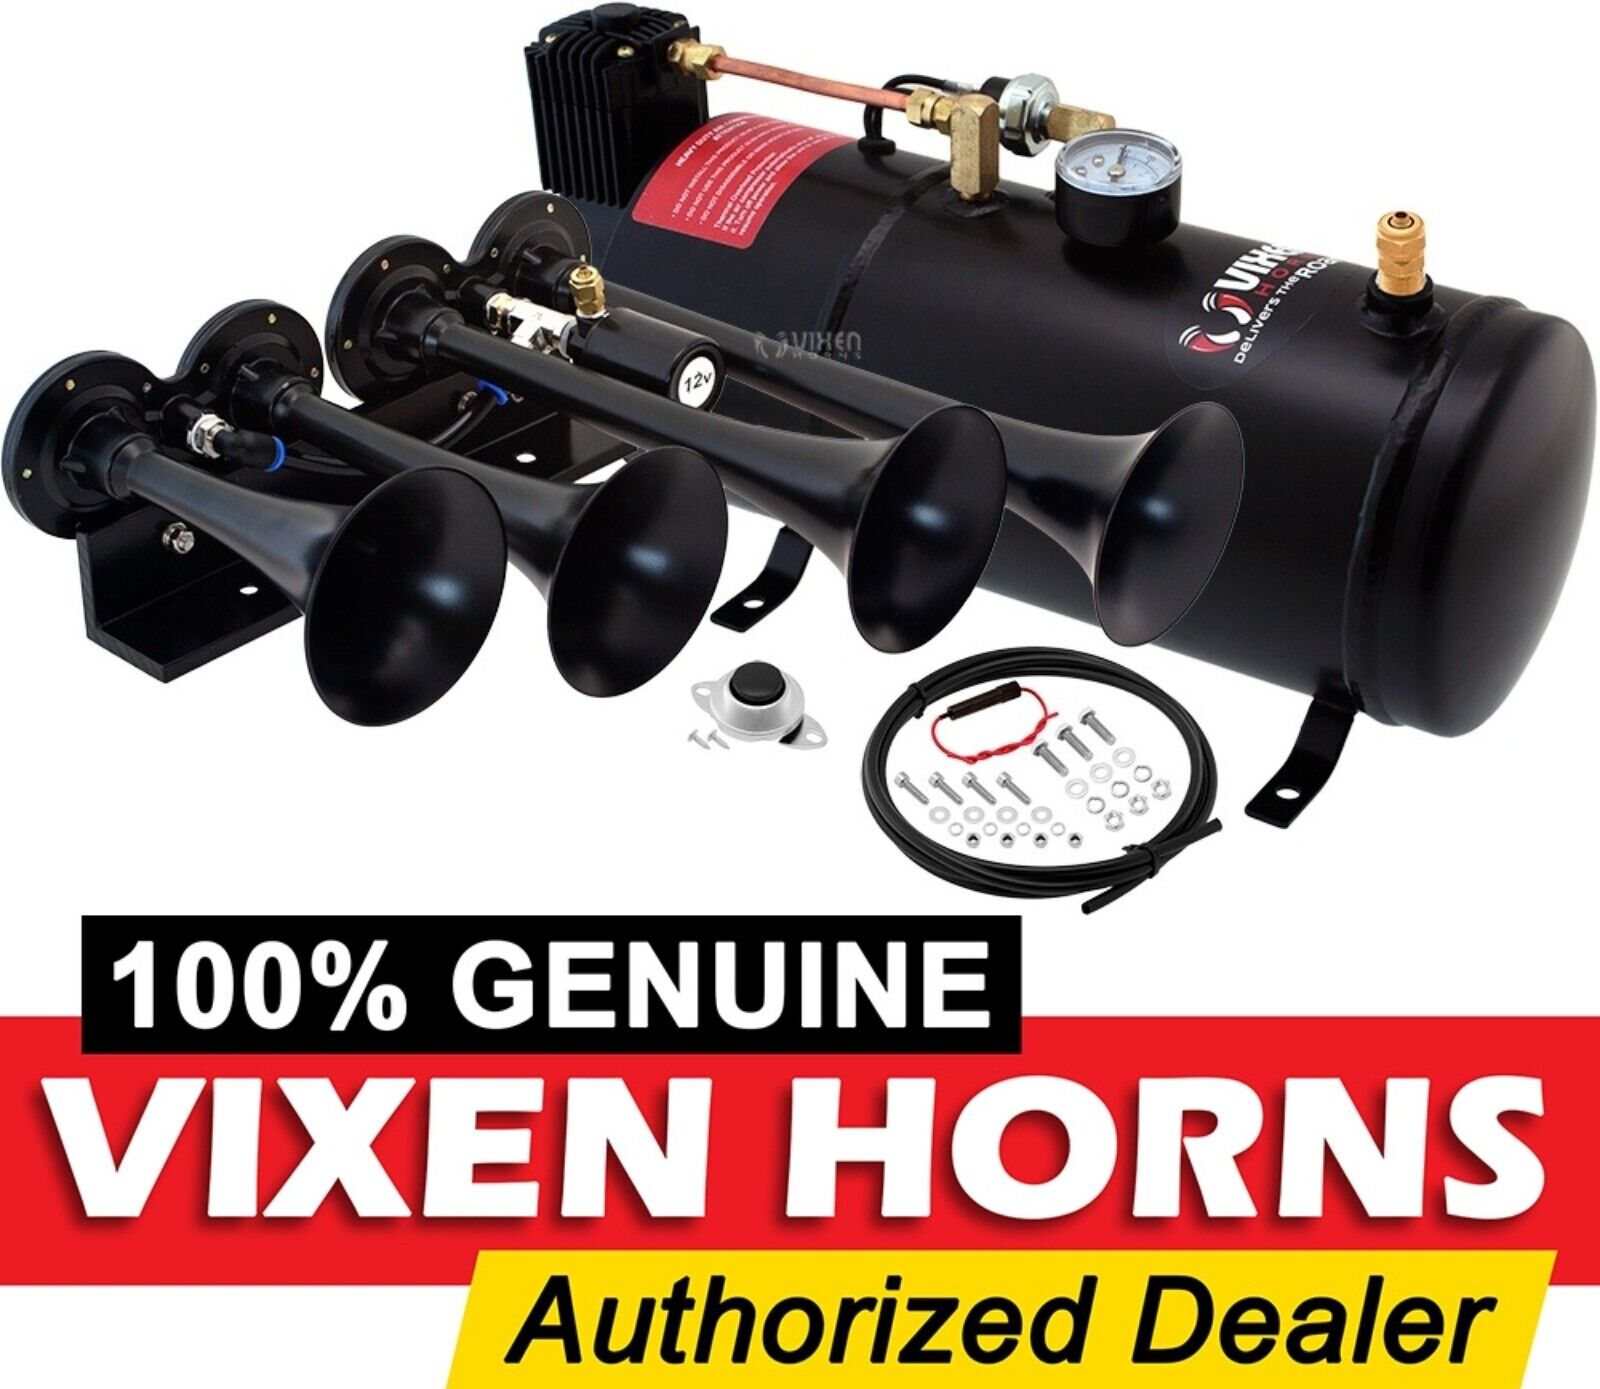 TRAIN HORN KIT FOR TRUCK/CAR/PICKUP LOUD SYSTEM /1G AIR TANK /150PSI /4 TRUMPETS